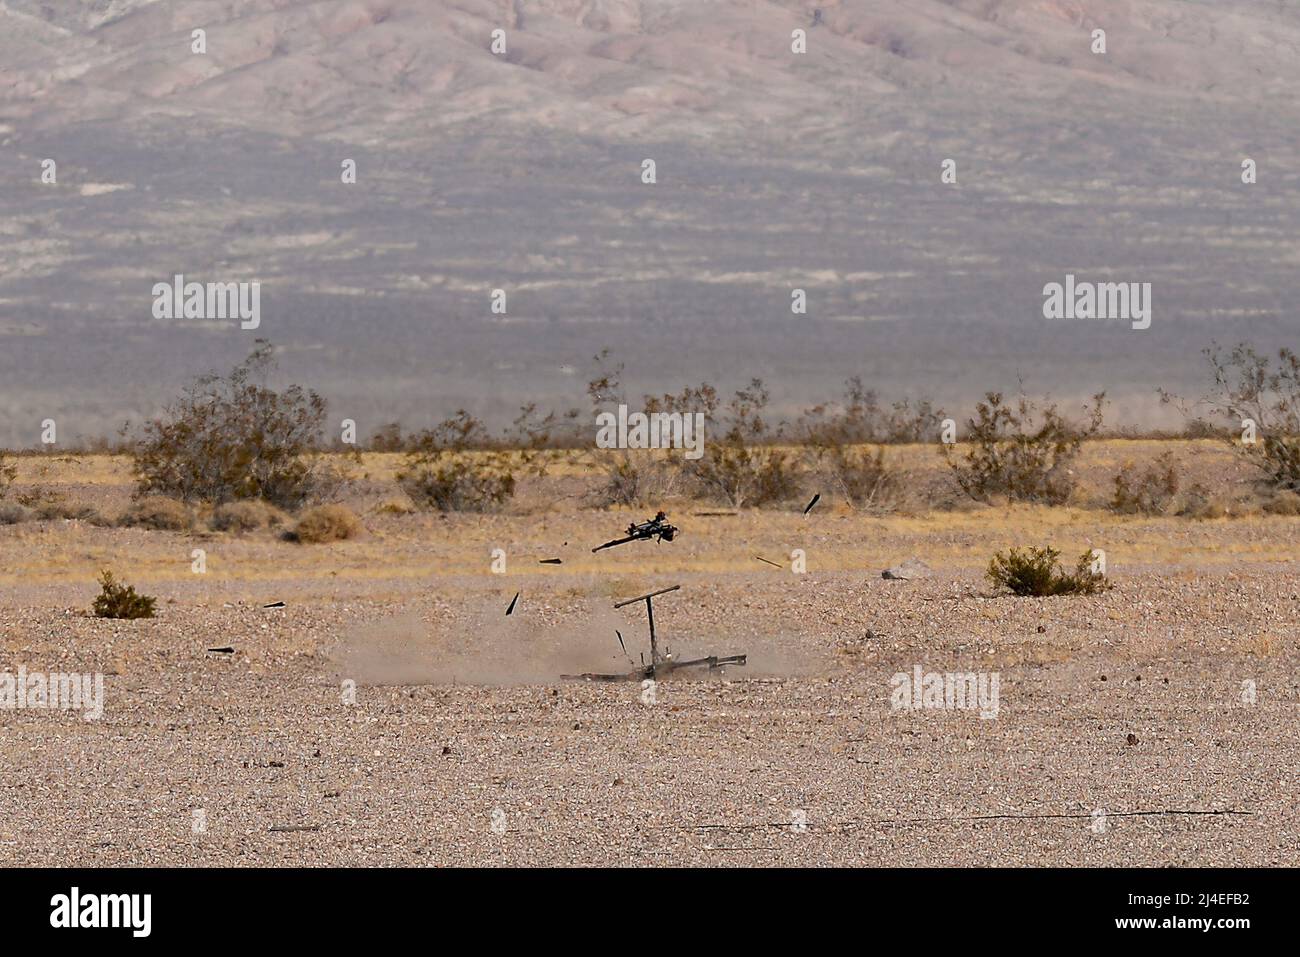 A  DJI S1000 drone crashes to the ground after being intercepted by an attack drone with attached net, part of the counter-unmanned aerial system developed by the team from Wright-Patterson Air Force Base, Ohio, during the 2016 Air Force Research Laboratory Commanders Challenge at the Nevada National Security Site, Las Vegas, NV., Dec. 13, 2016. Teams were given six months to develop a complete counter-unmanned aerial system to aid in base defense. In addition to the attack drone, Wright-Patterson's system uses a camera and laser range finder to detect UAS devices. (U.S. Air Force photo by Wes Stock Photo